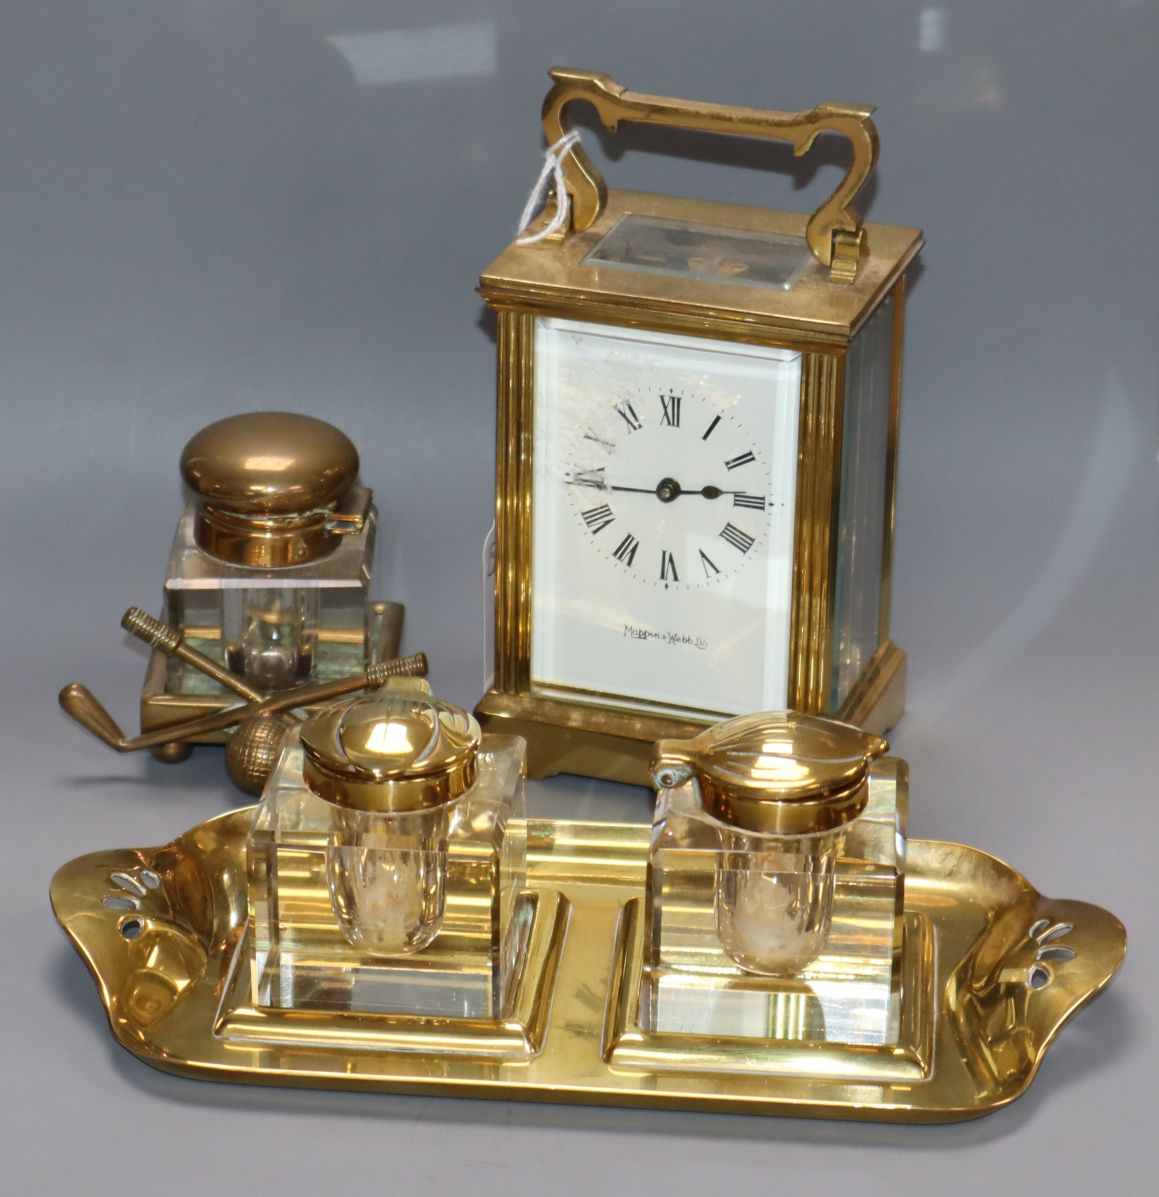 A novelty golfing brass inkwell, a two bottled inkwell and a Mappin & Webb timepiece, 11.5cm